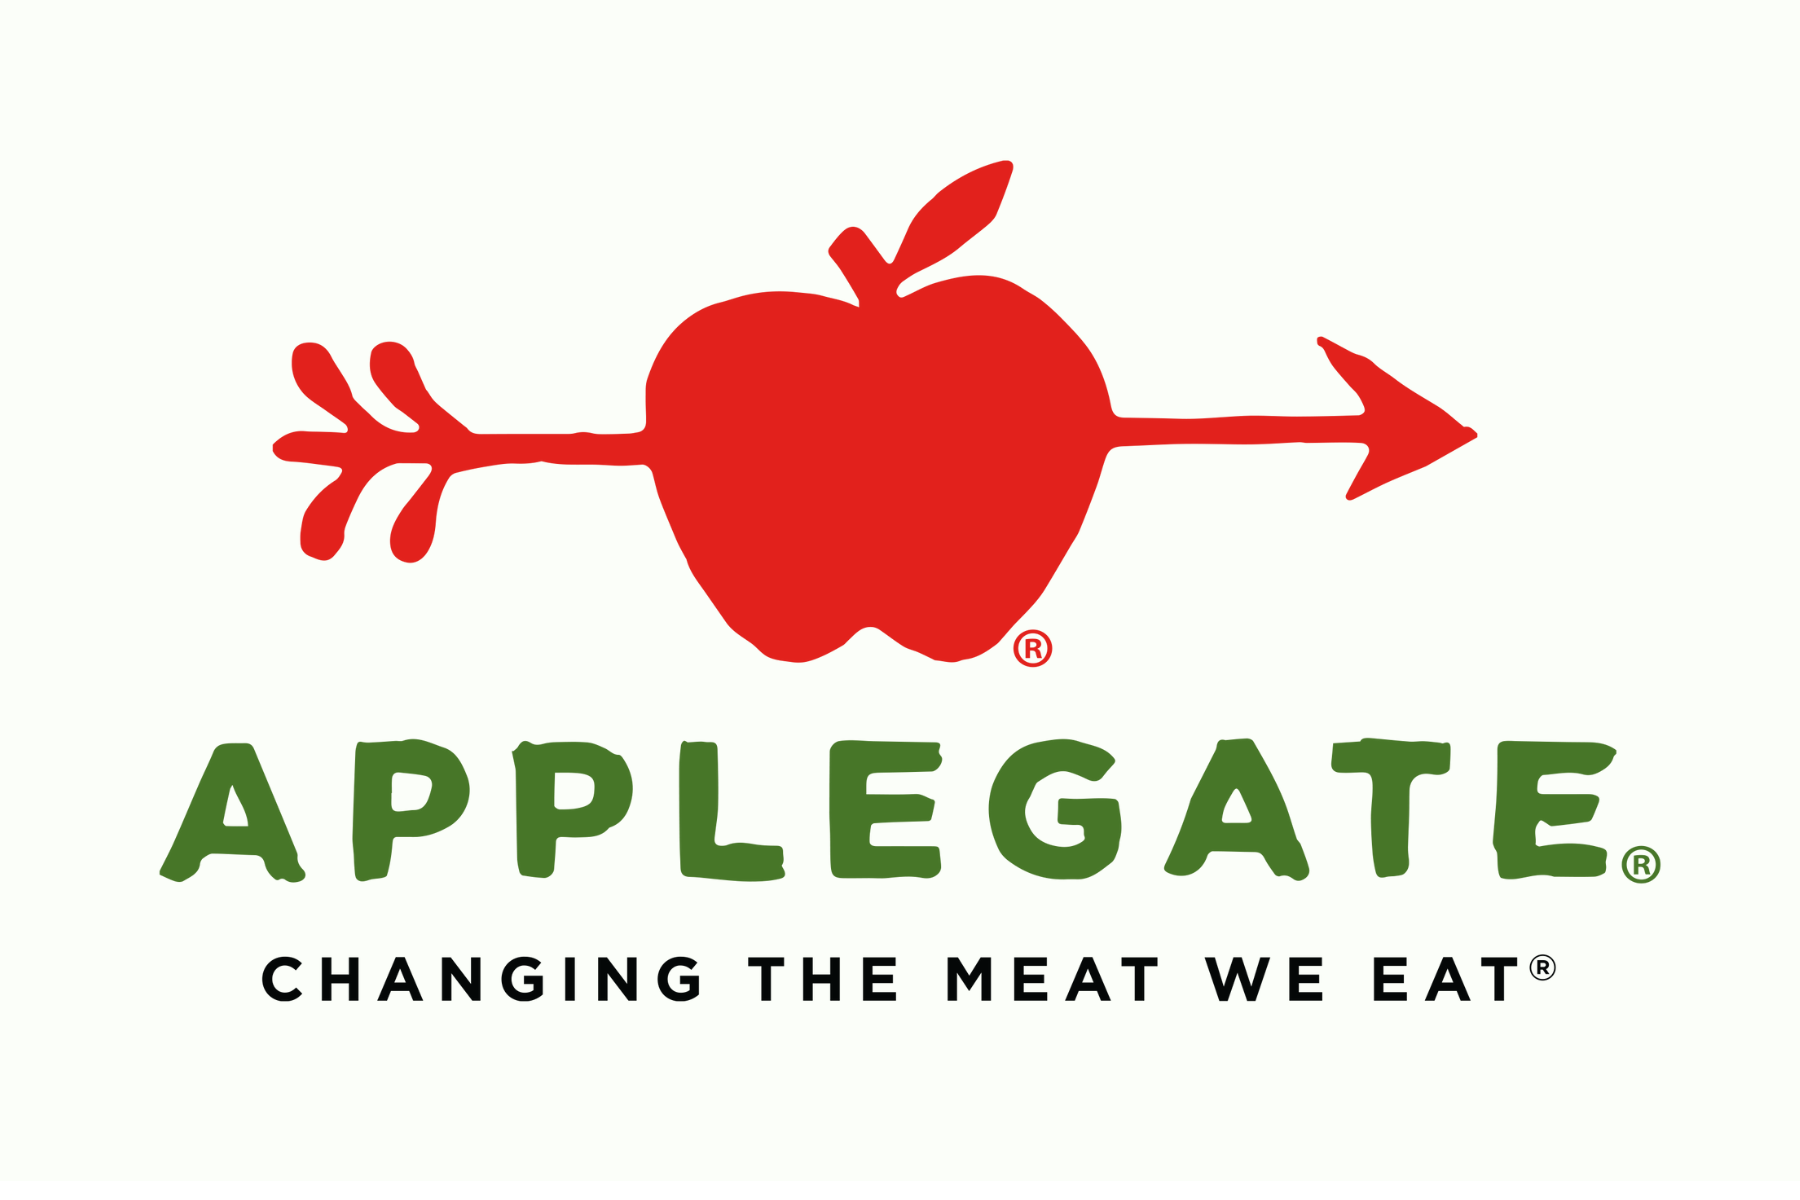 Applegate Changing the Meat We Eat